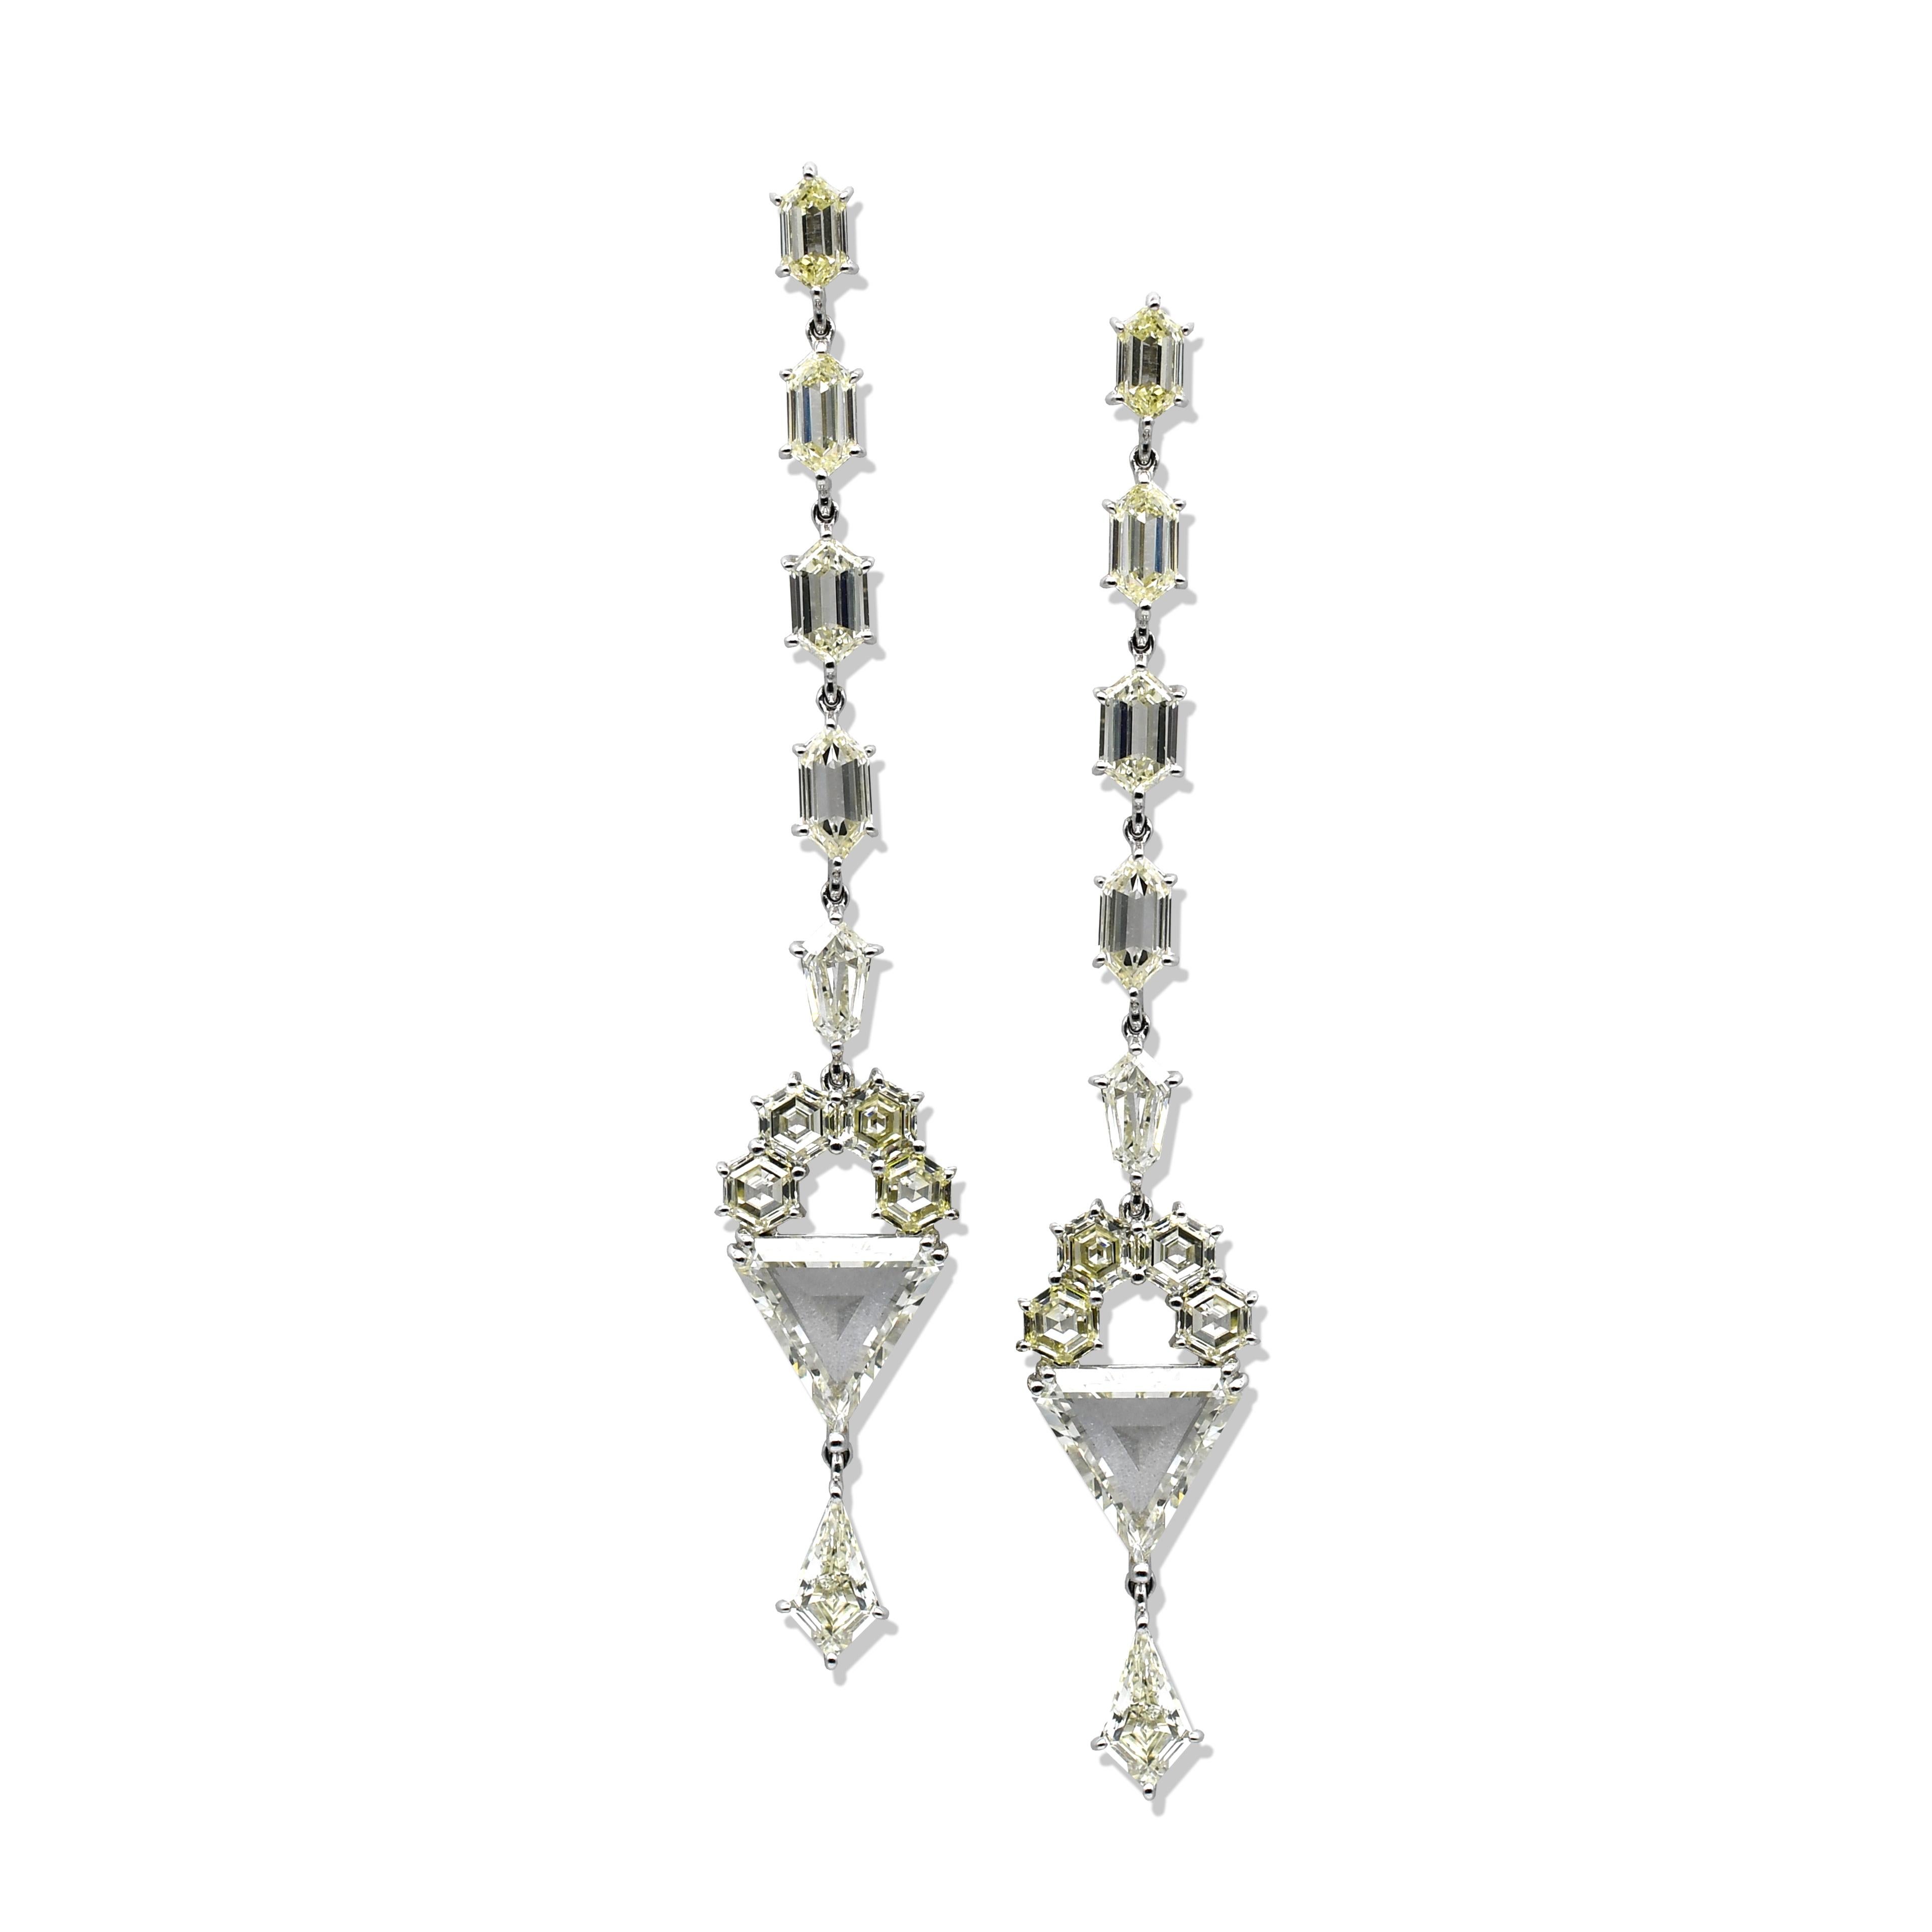 This Classic Chandelier Fancy Diamond Earring contains total 22 Pieces of Stepcut Triangles, Hexagons and Spike Diamonds totaling 11.24 Carats Beautifully Crafted in 8.27 Gram 18 Karat White Gold. It is 7 Centimeter Long From Top to Bottom.
All